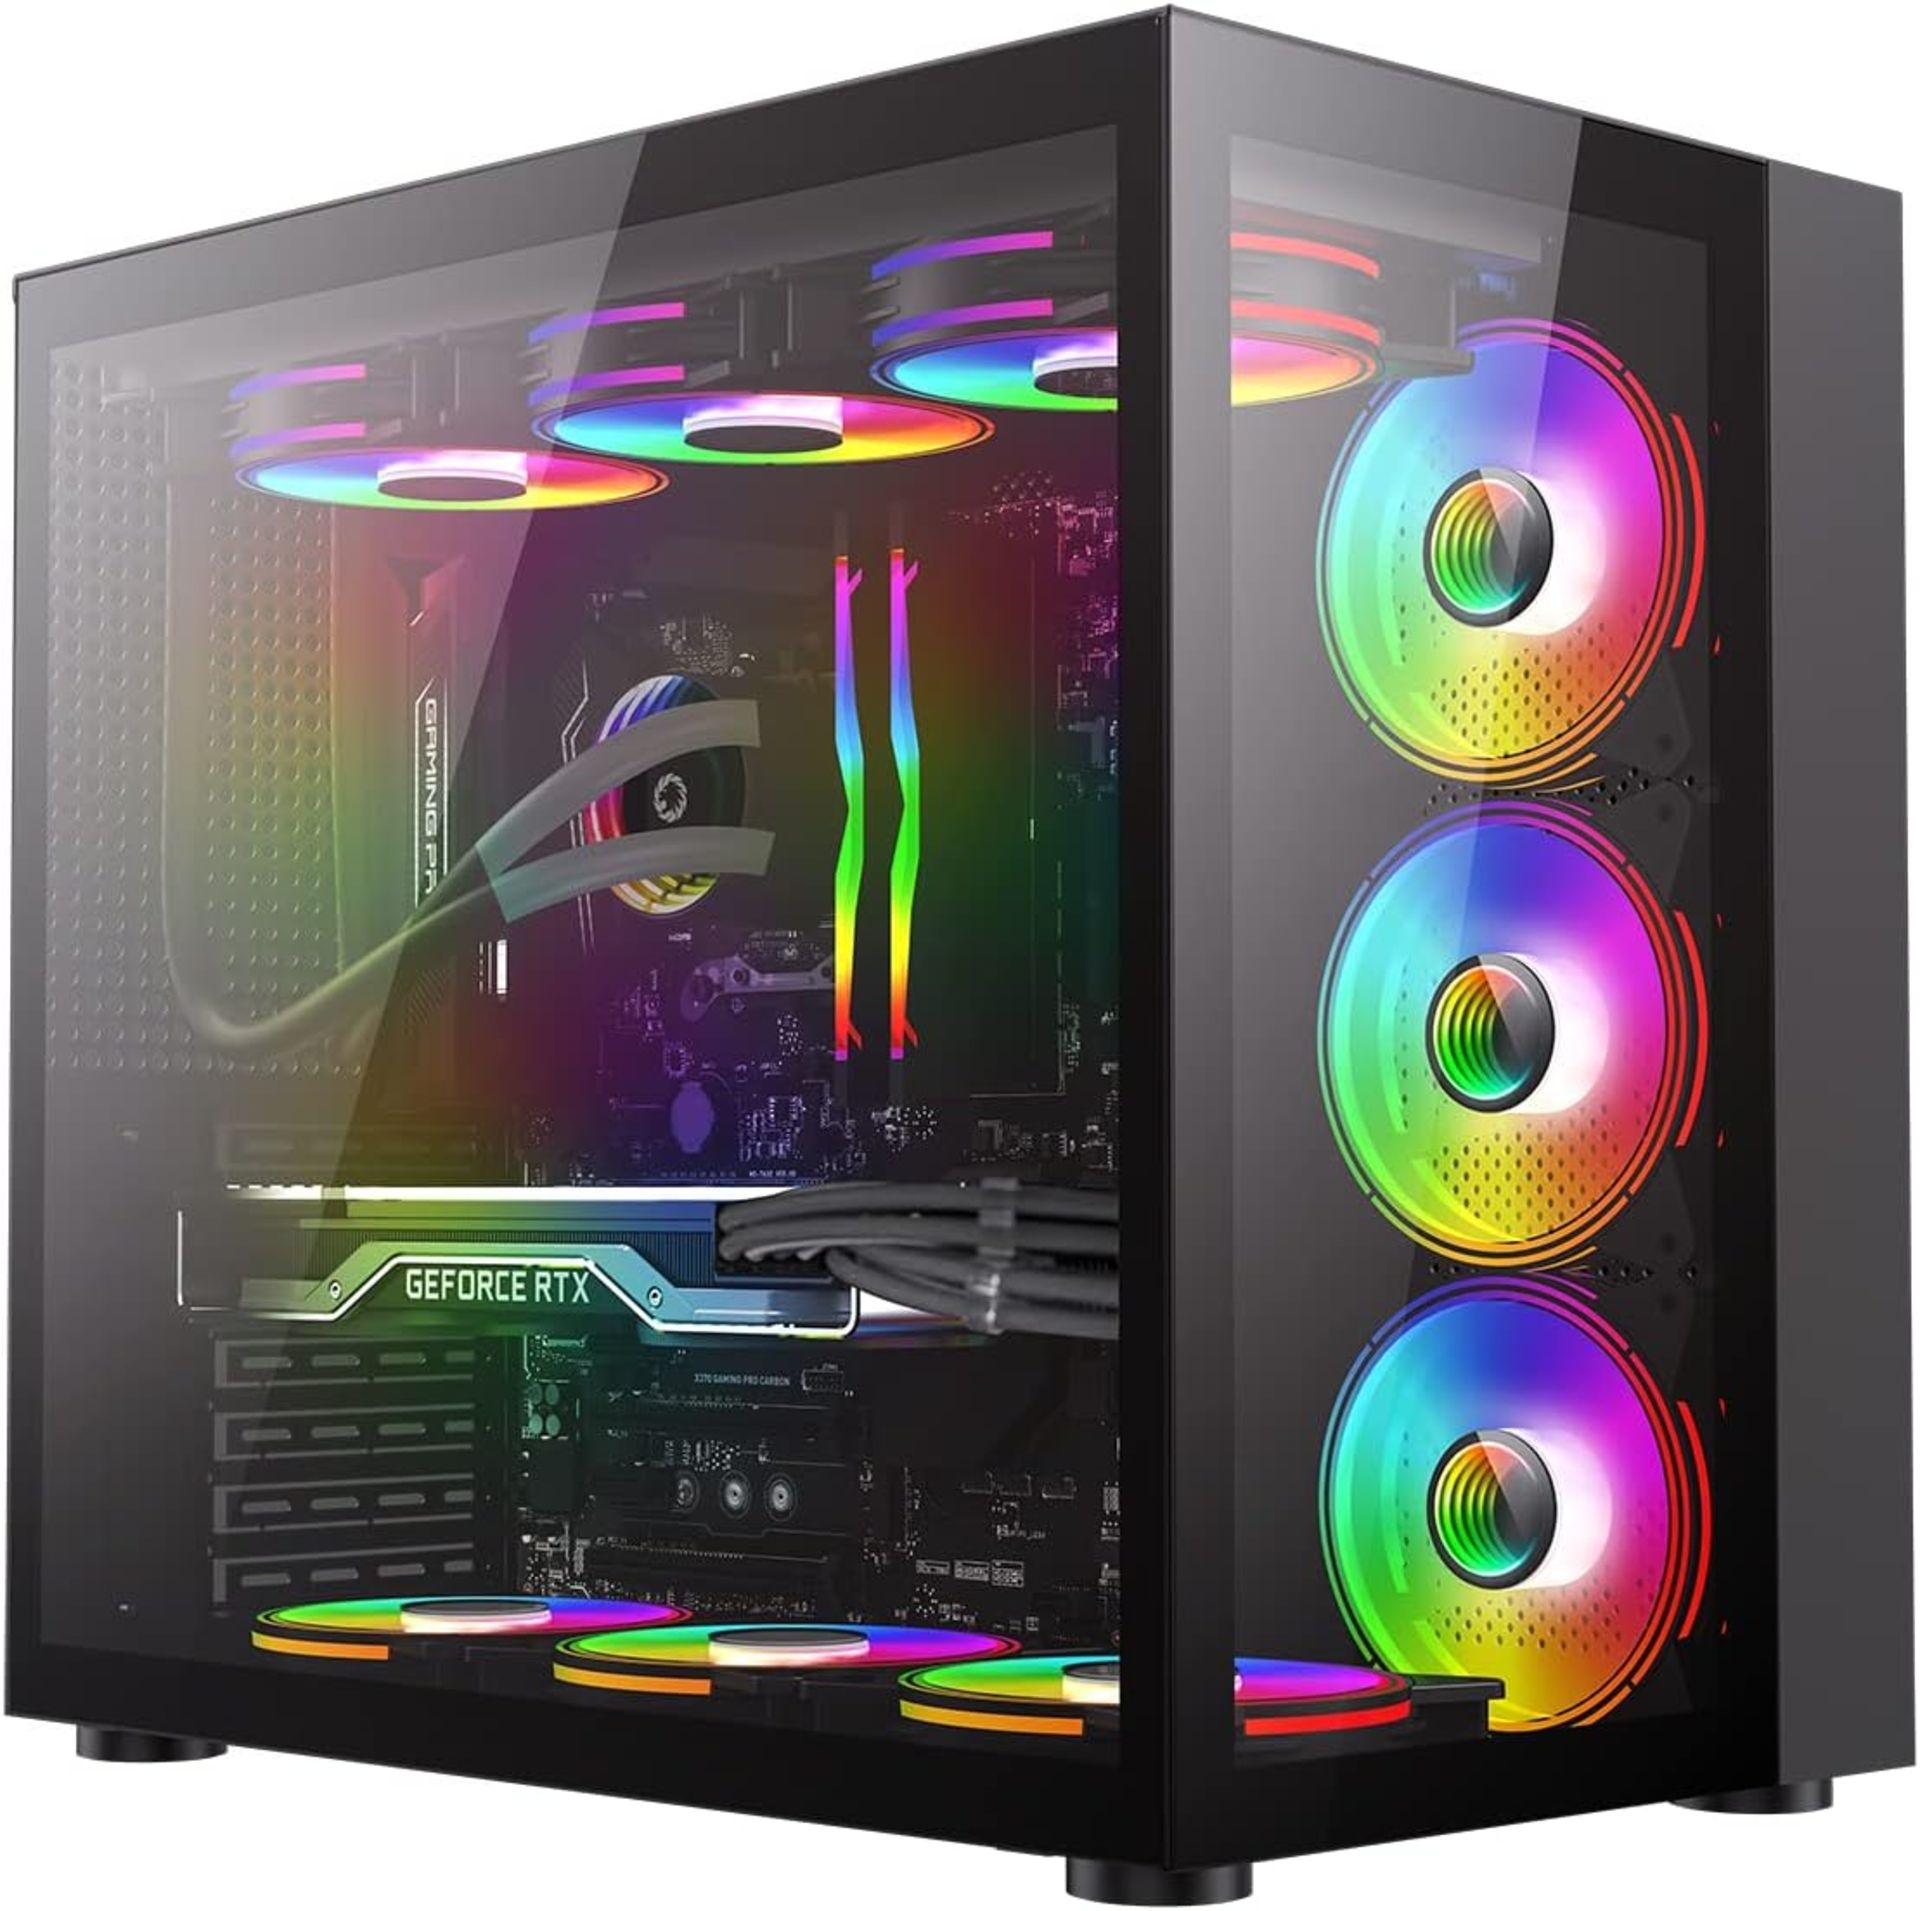 NEW & BOXED GAMEMAX Infinity Tempered Glass Mid-Tower ATX Case - BLACK. RRP £74.99. Stand out with - Image 6 of 8